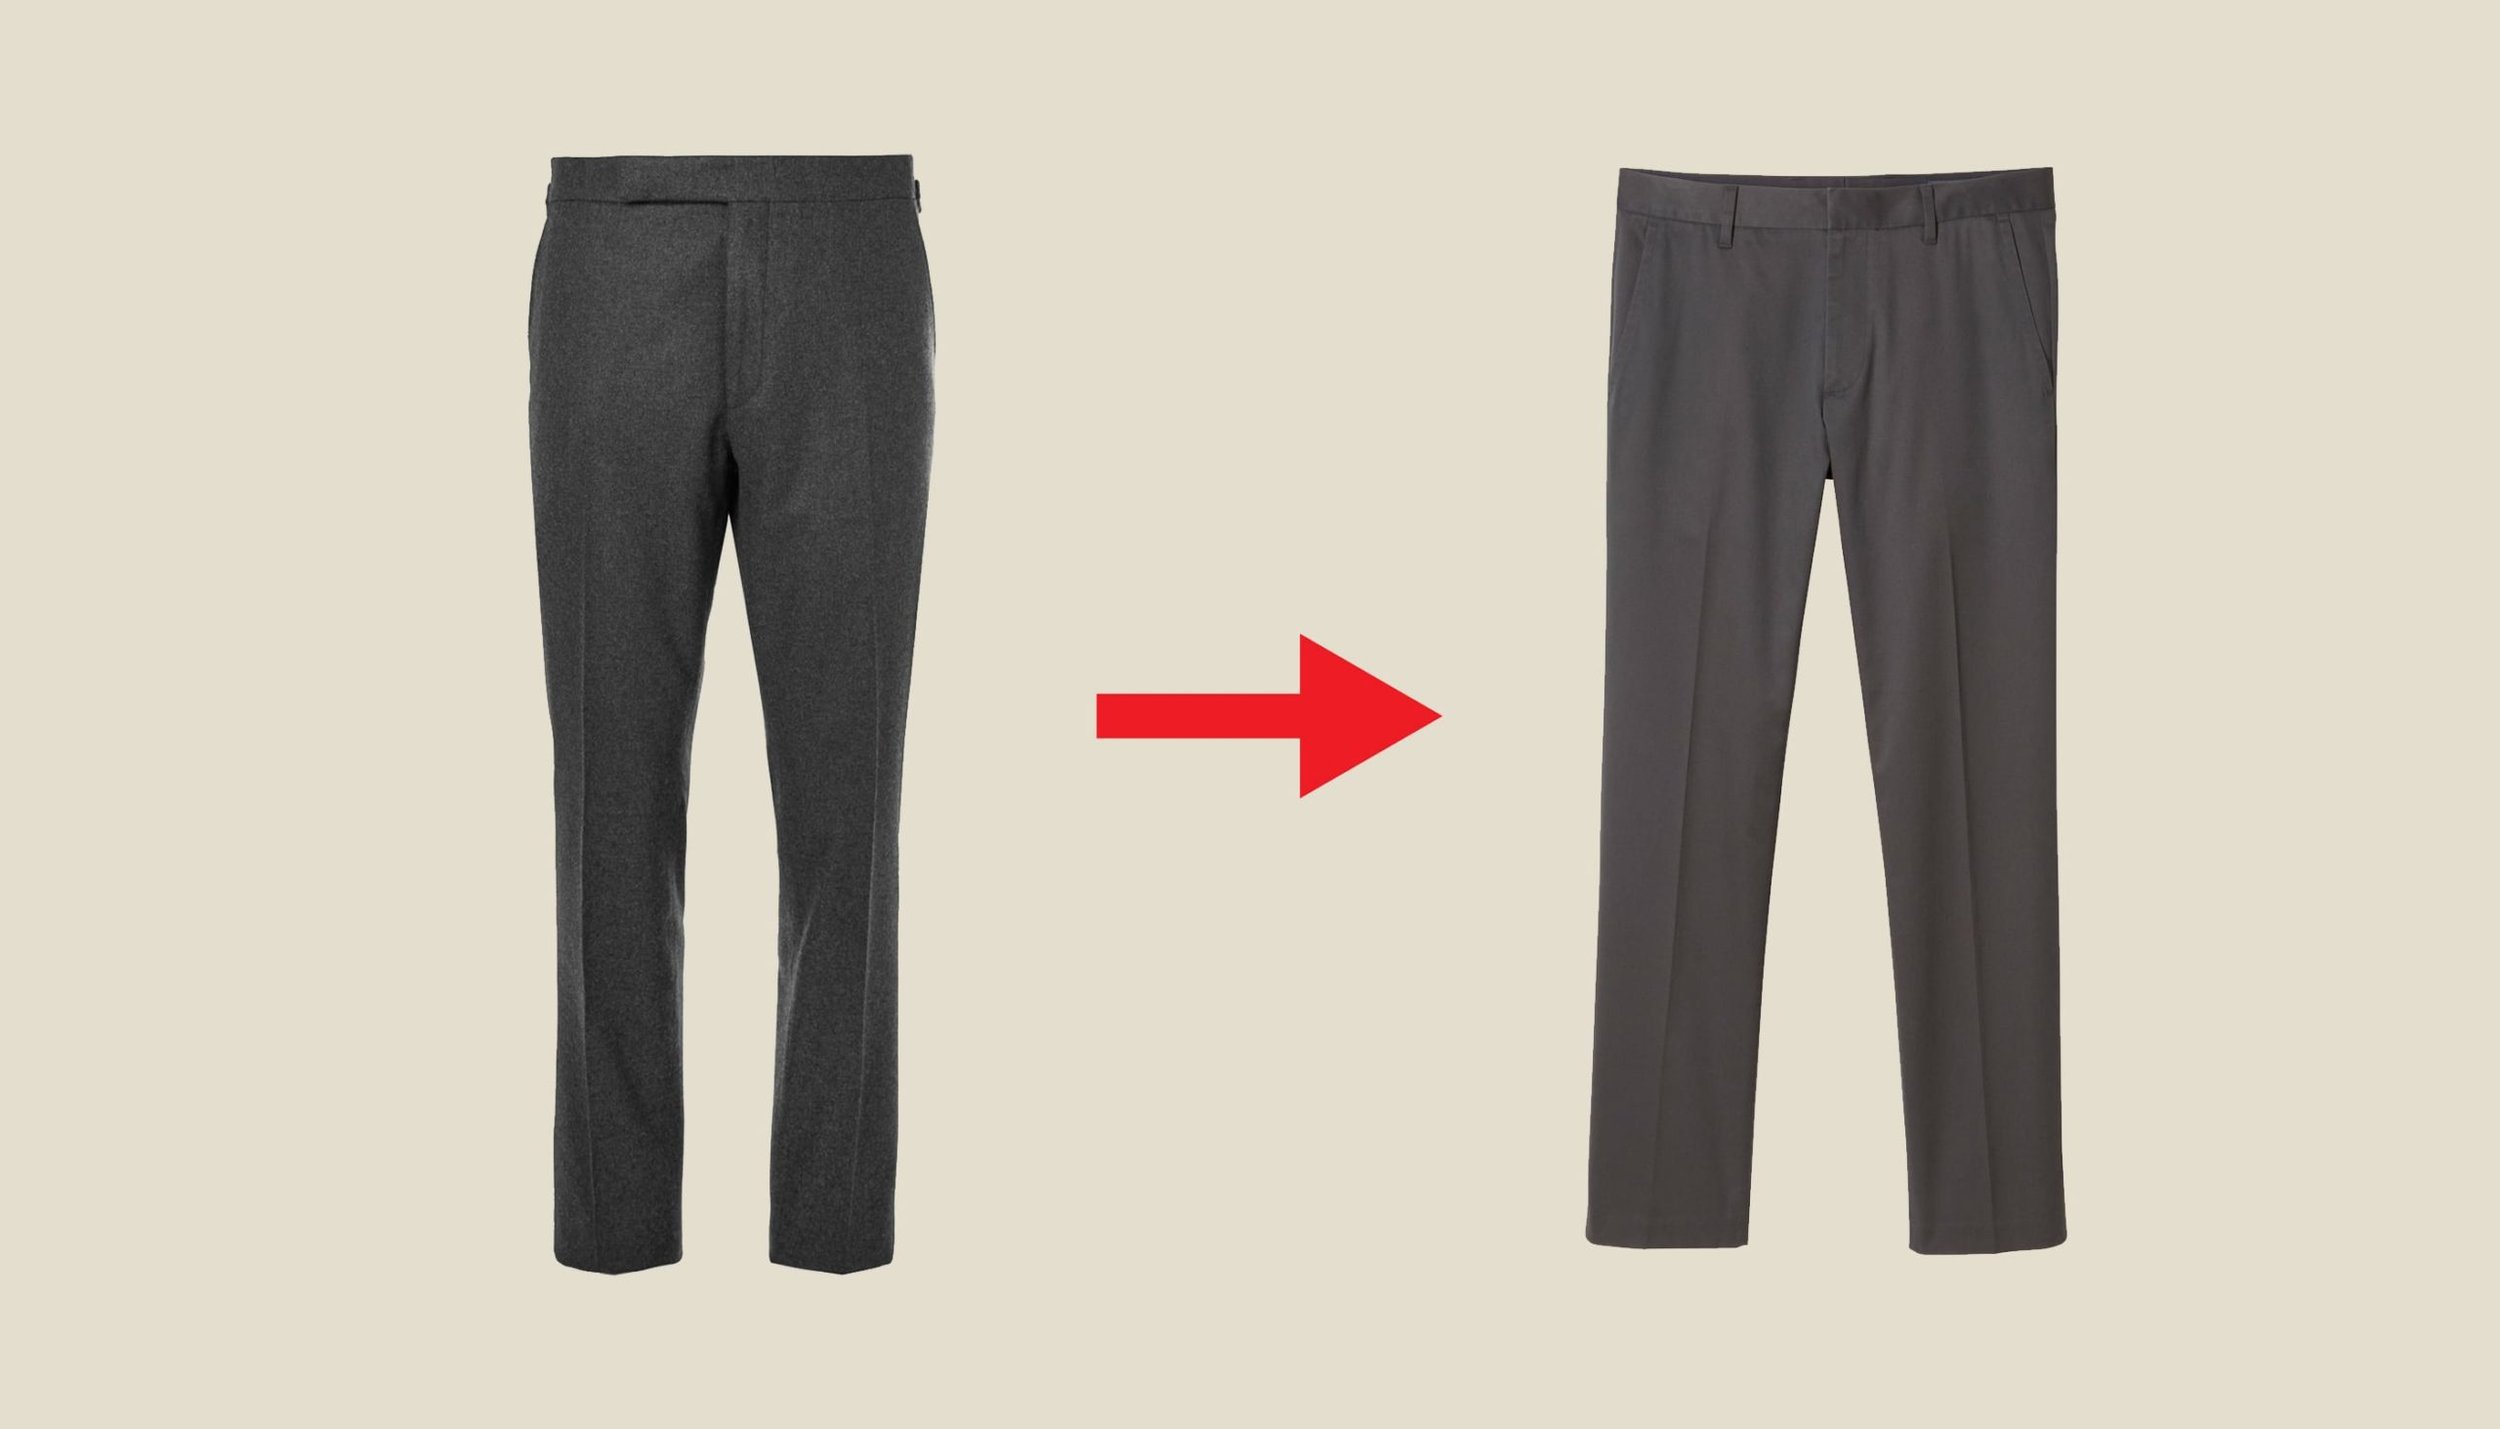 wool trousers to cotton trousers